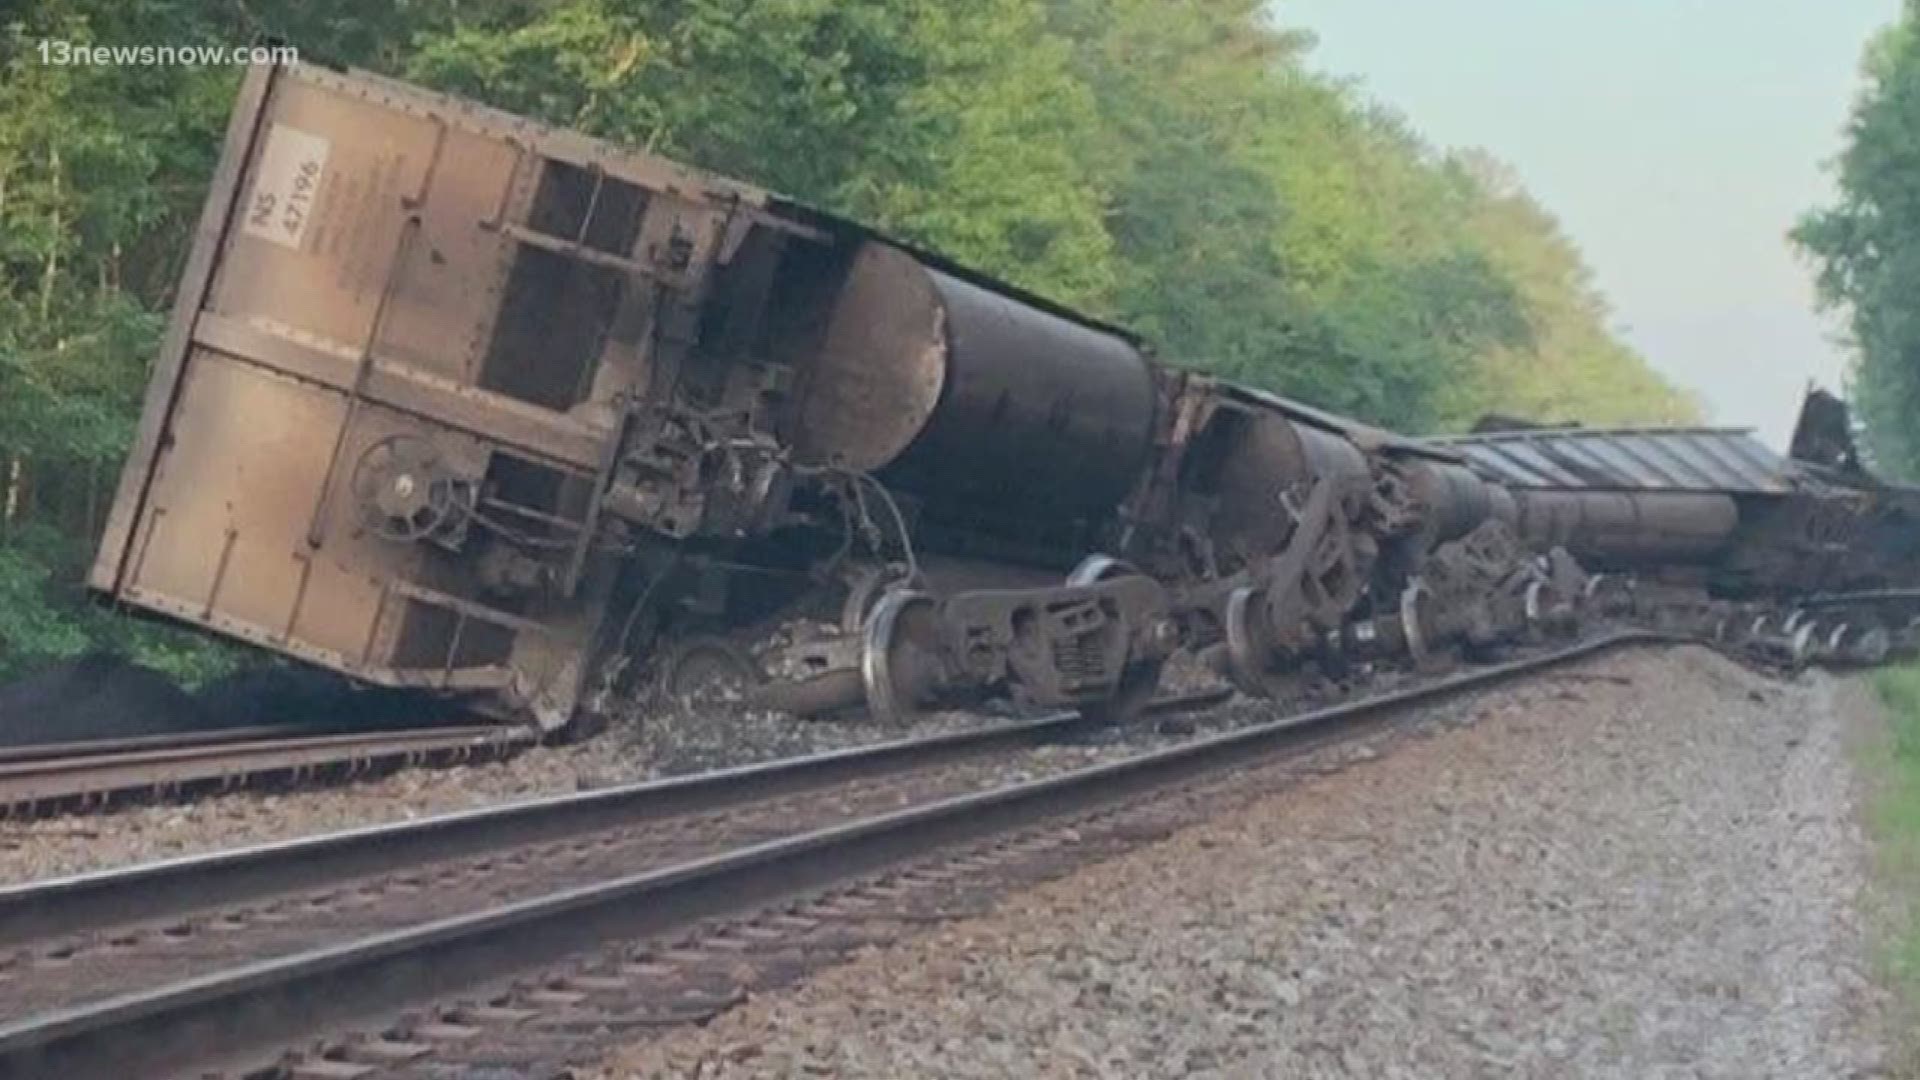 Wildlife specialists said they're monitoring the Great Dismal Swamp after coal spilled into it from a train derailment.